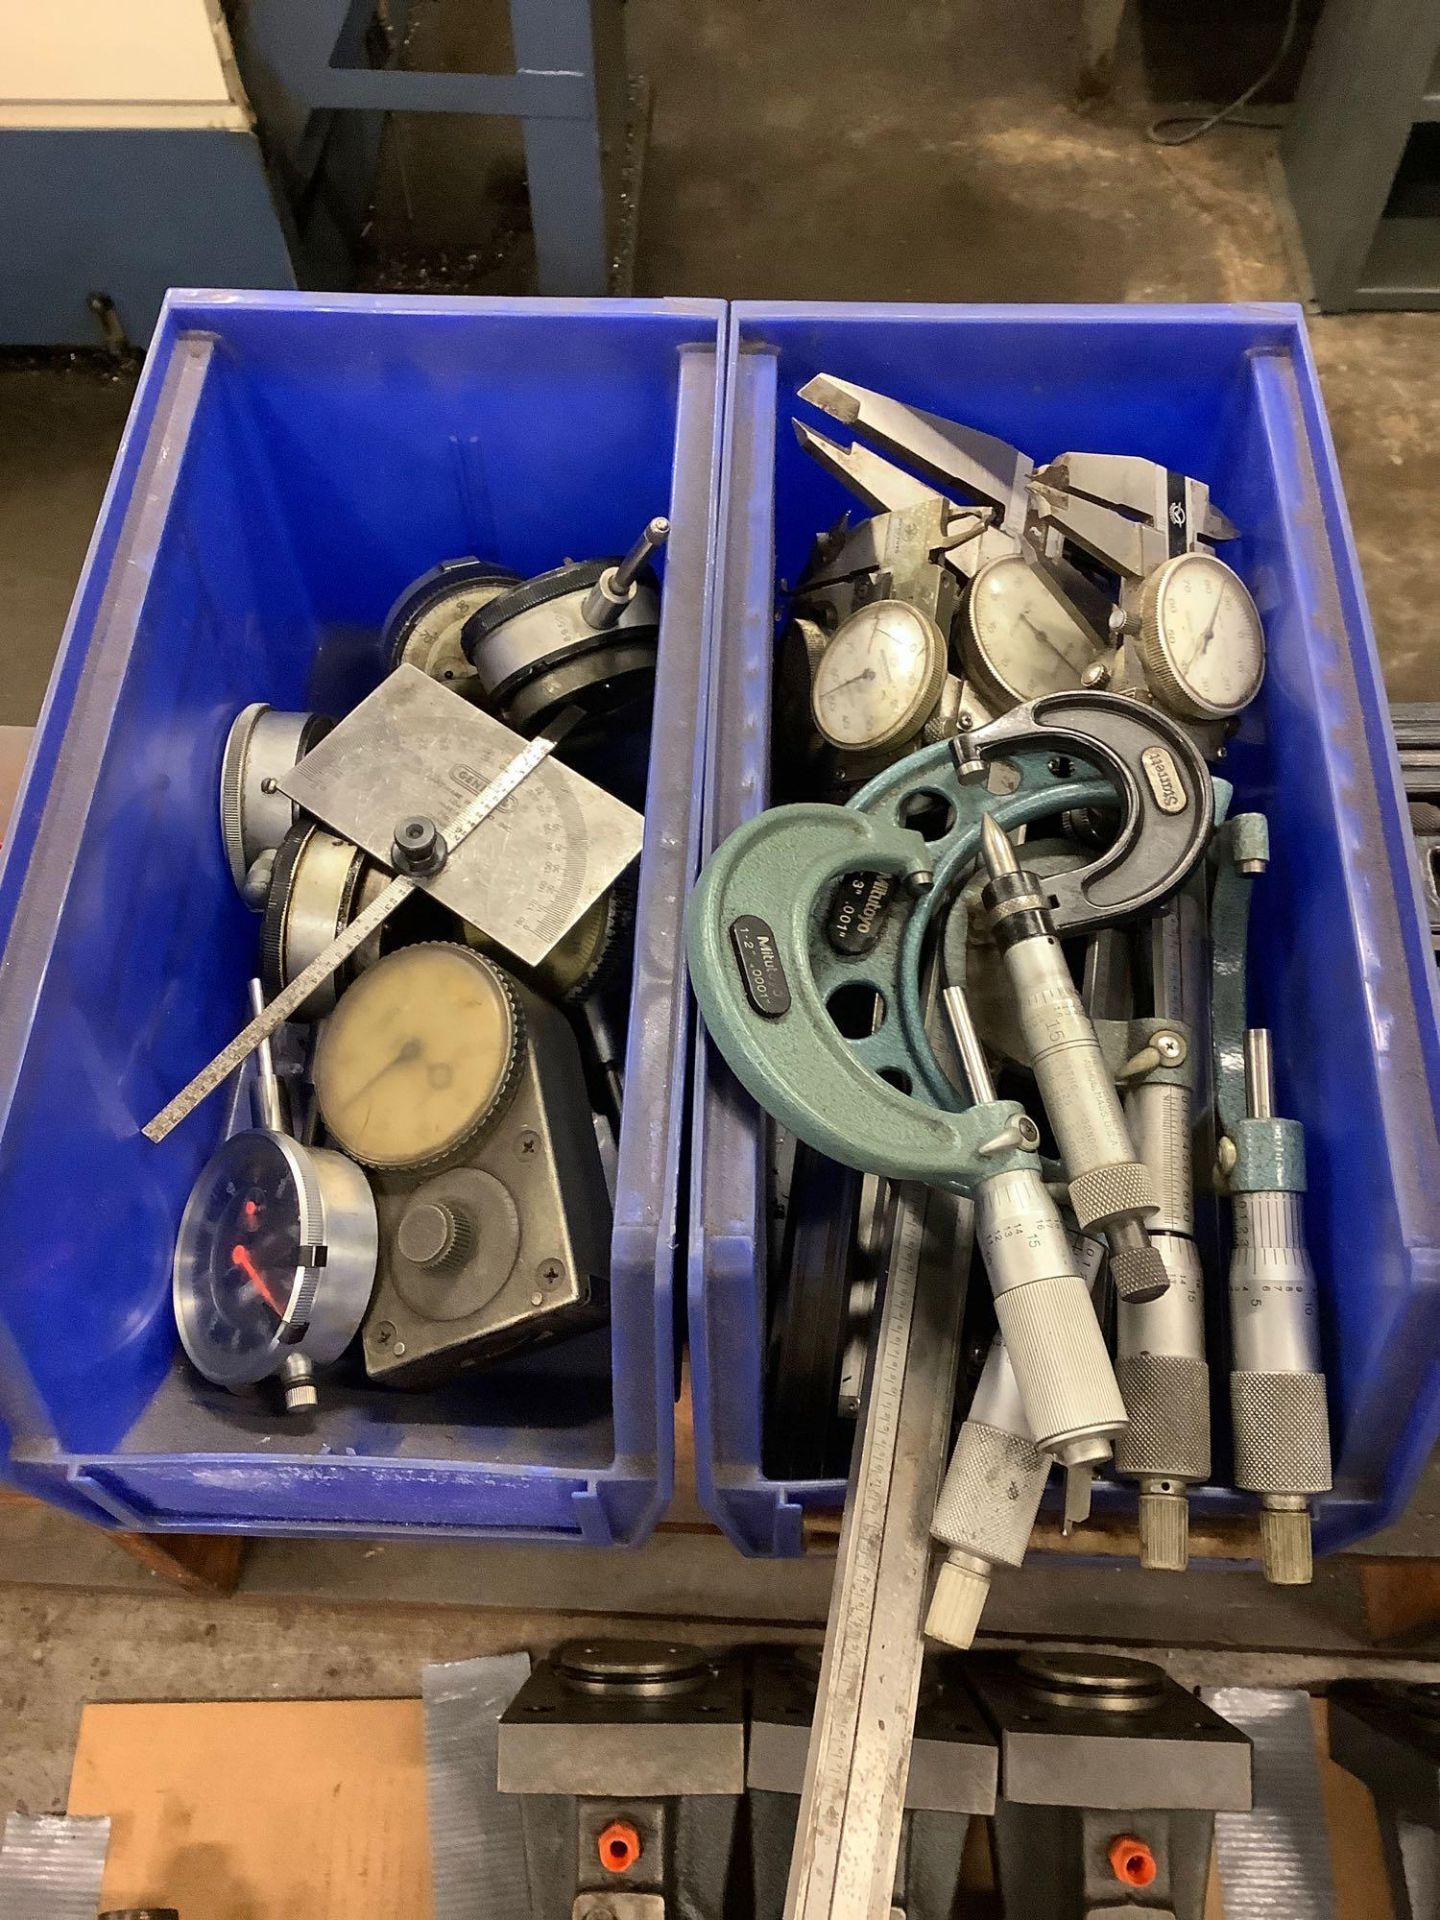 Lot: Calipers, Micrometers, Gauges; assorted sizes